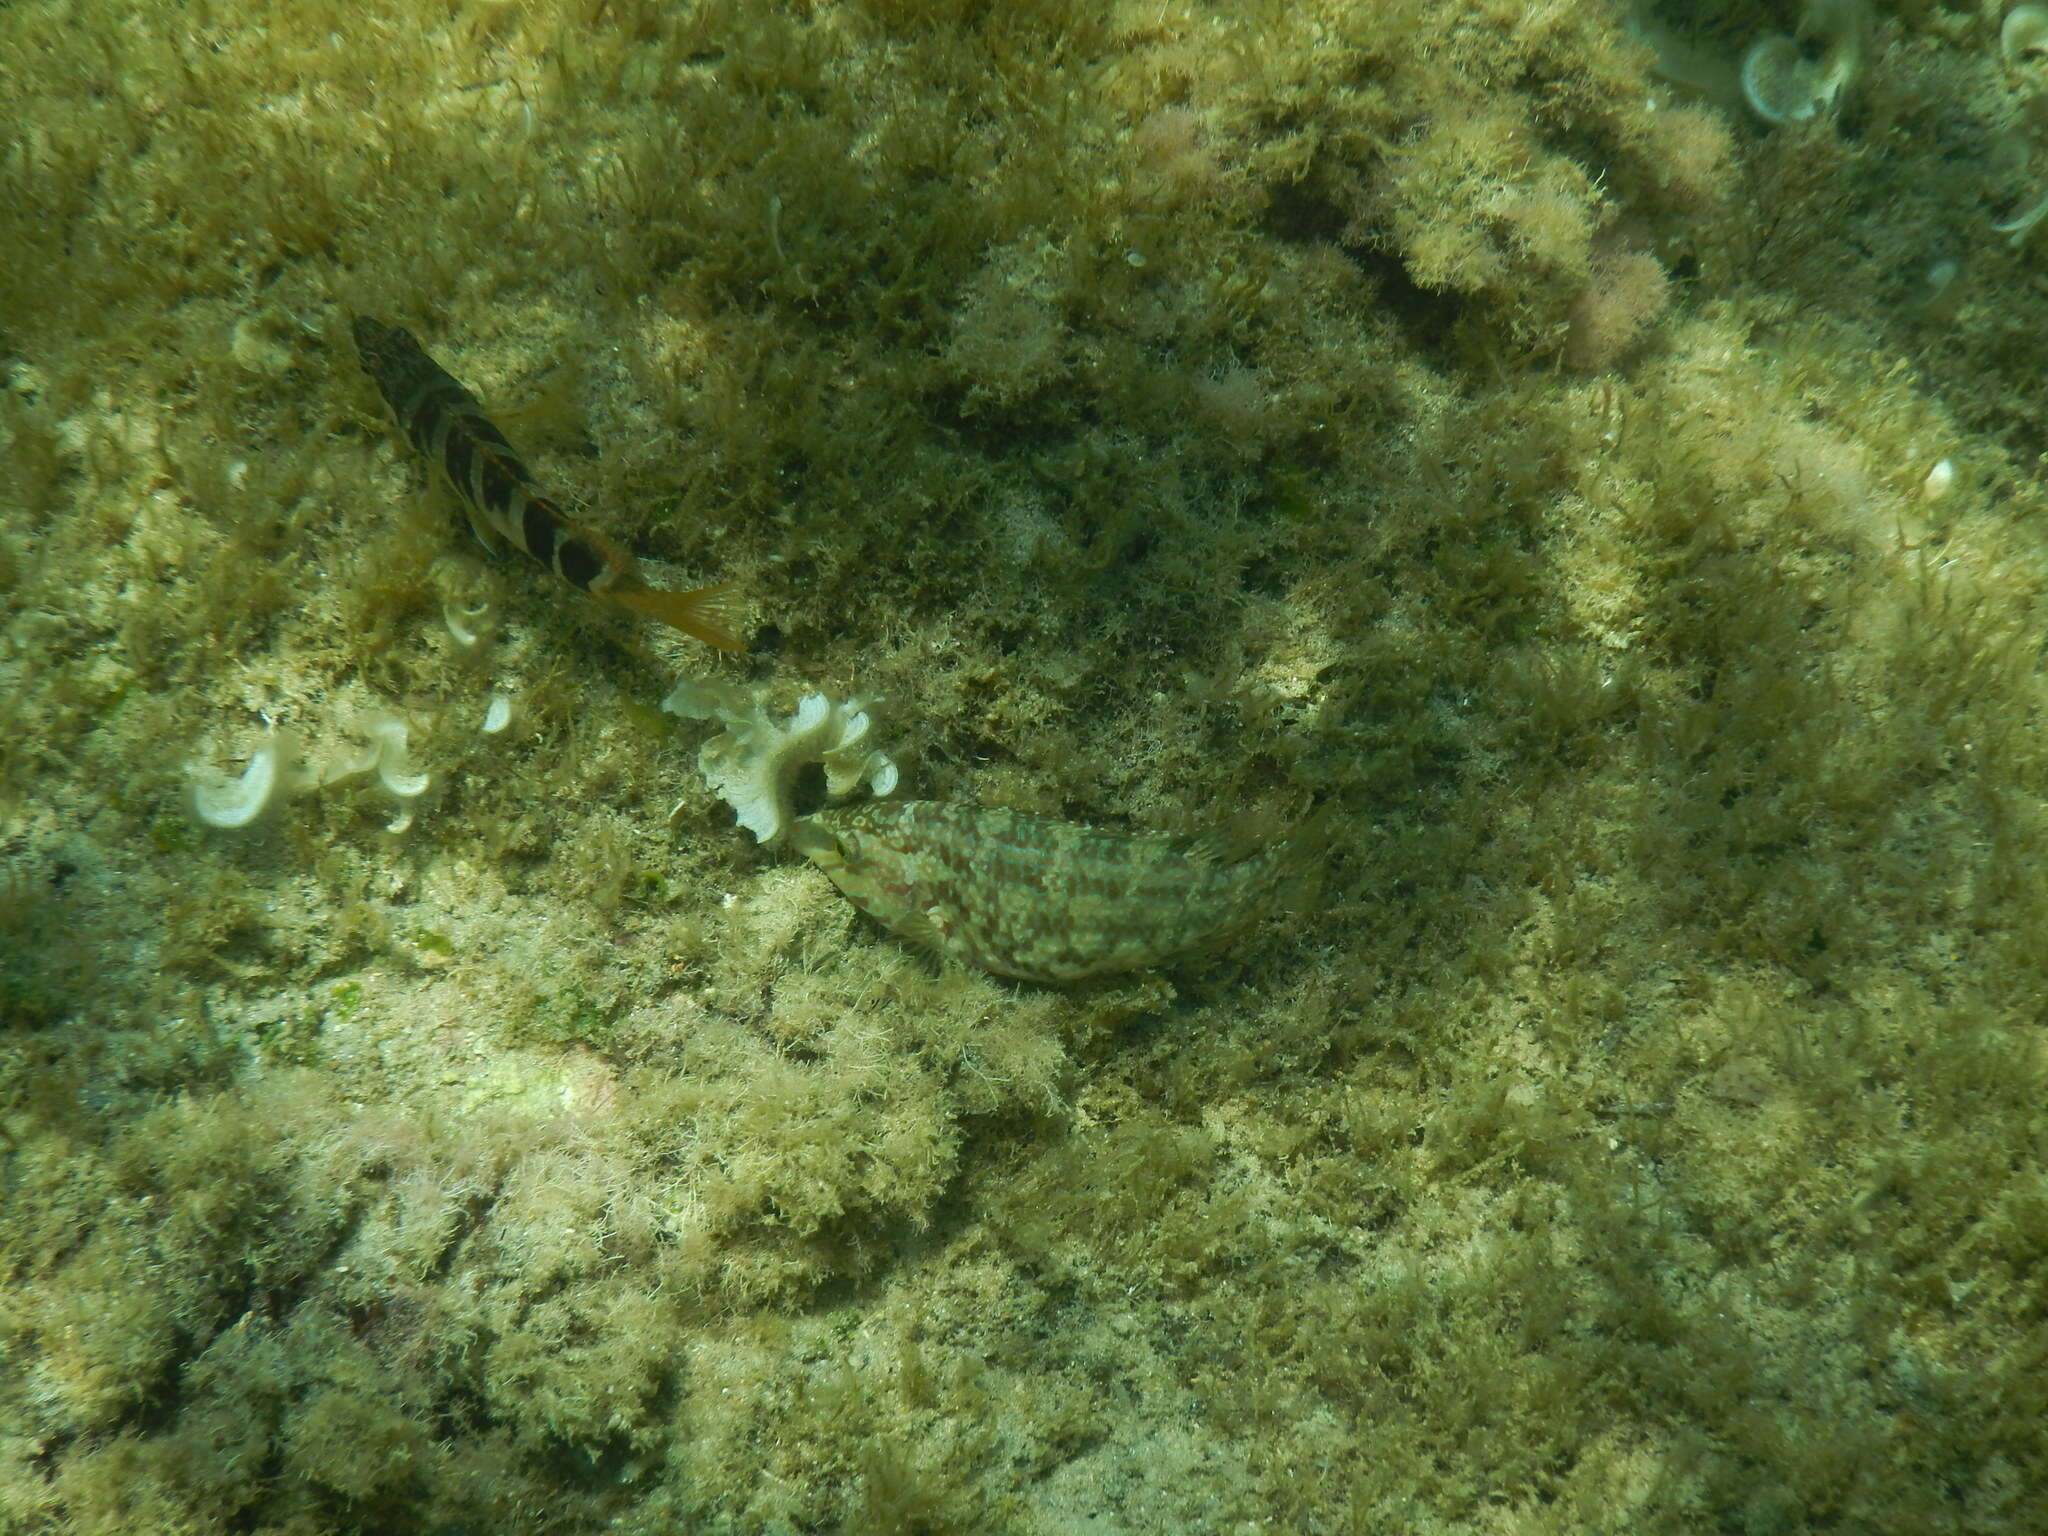 Image of Five-spotted Wrasse